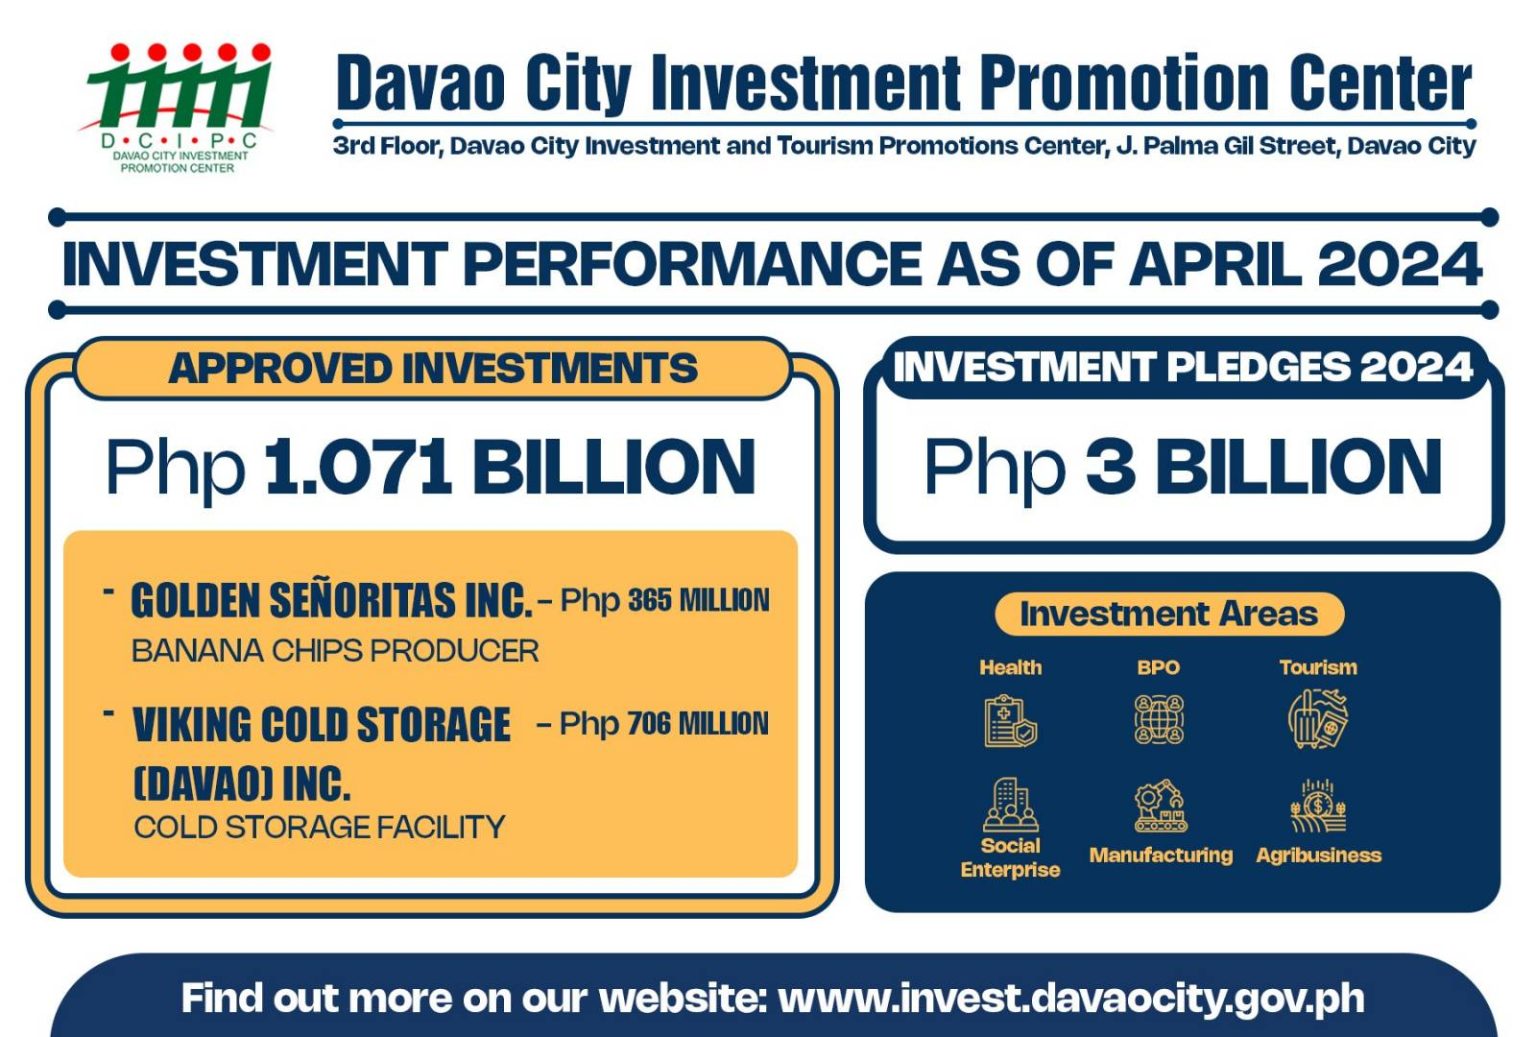 P1B DIRECT INVESTMENT PLEDGES MATERIALIZE IN DAVAO CITY FOR Q1 2024